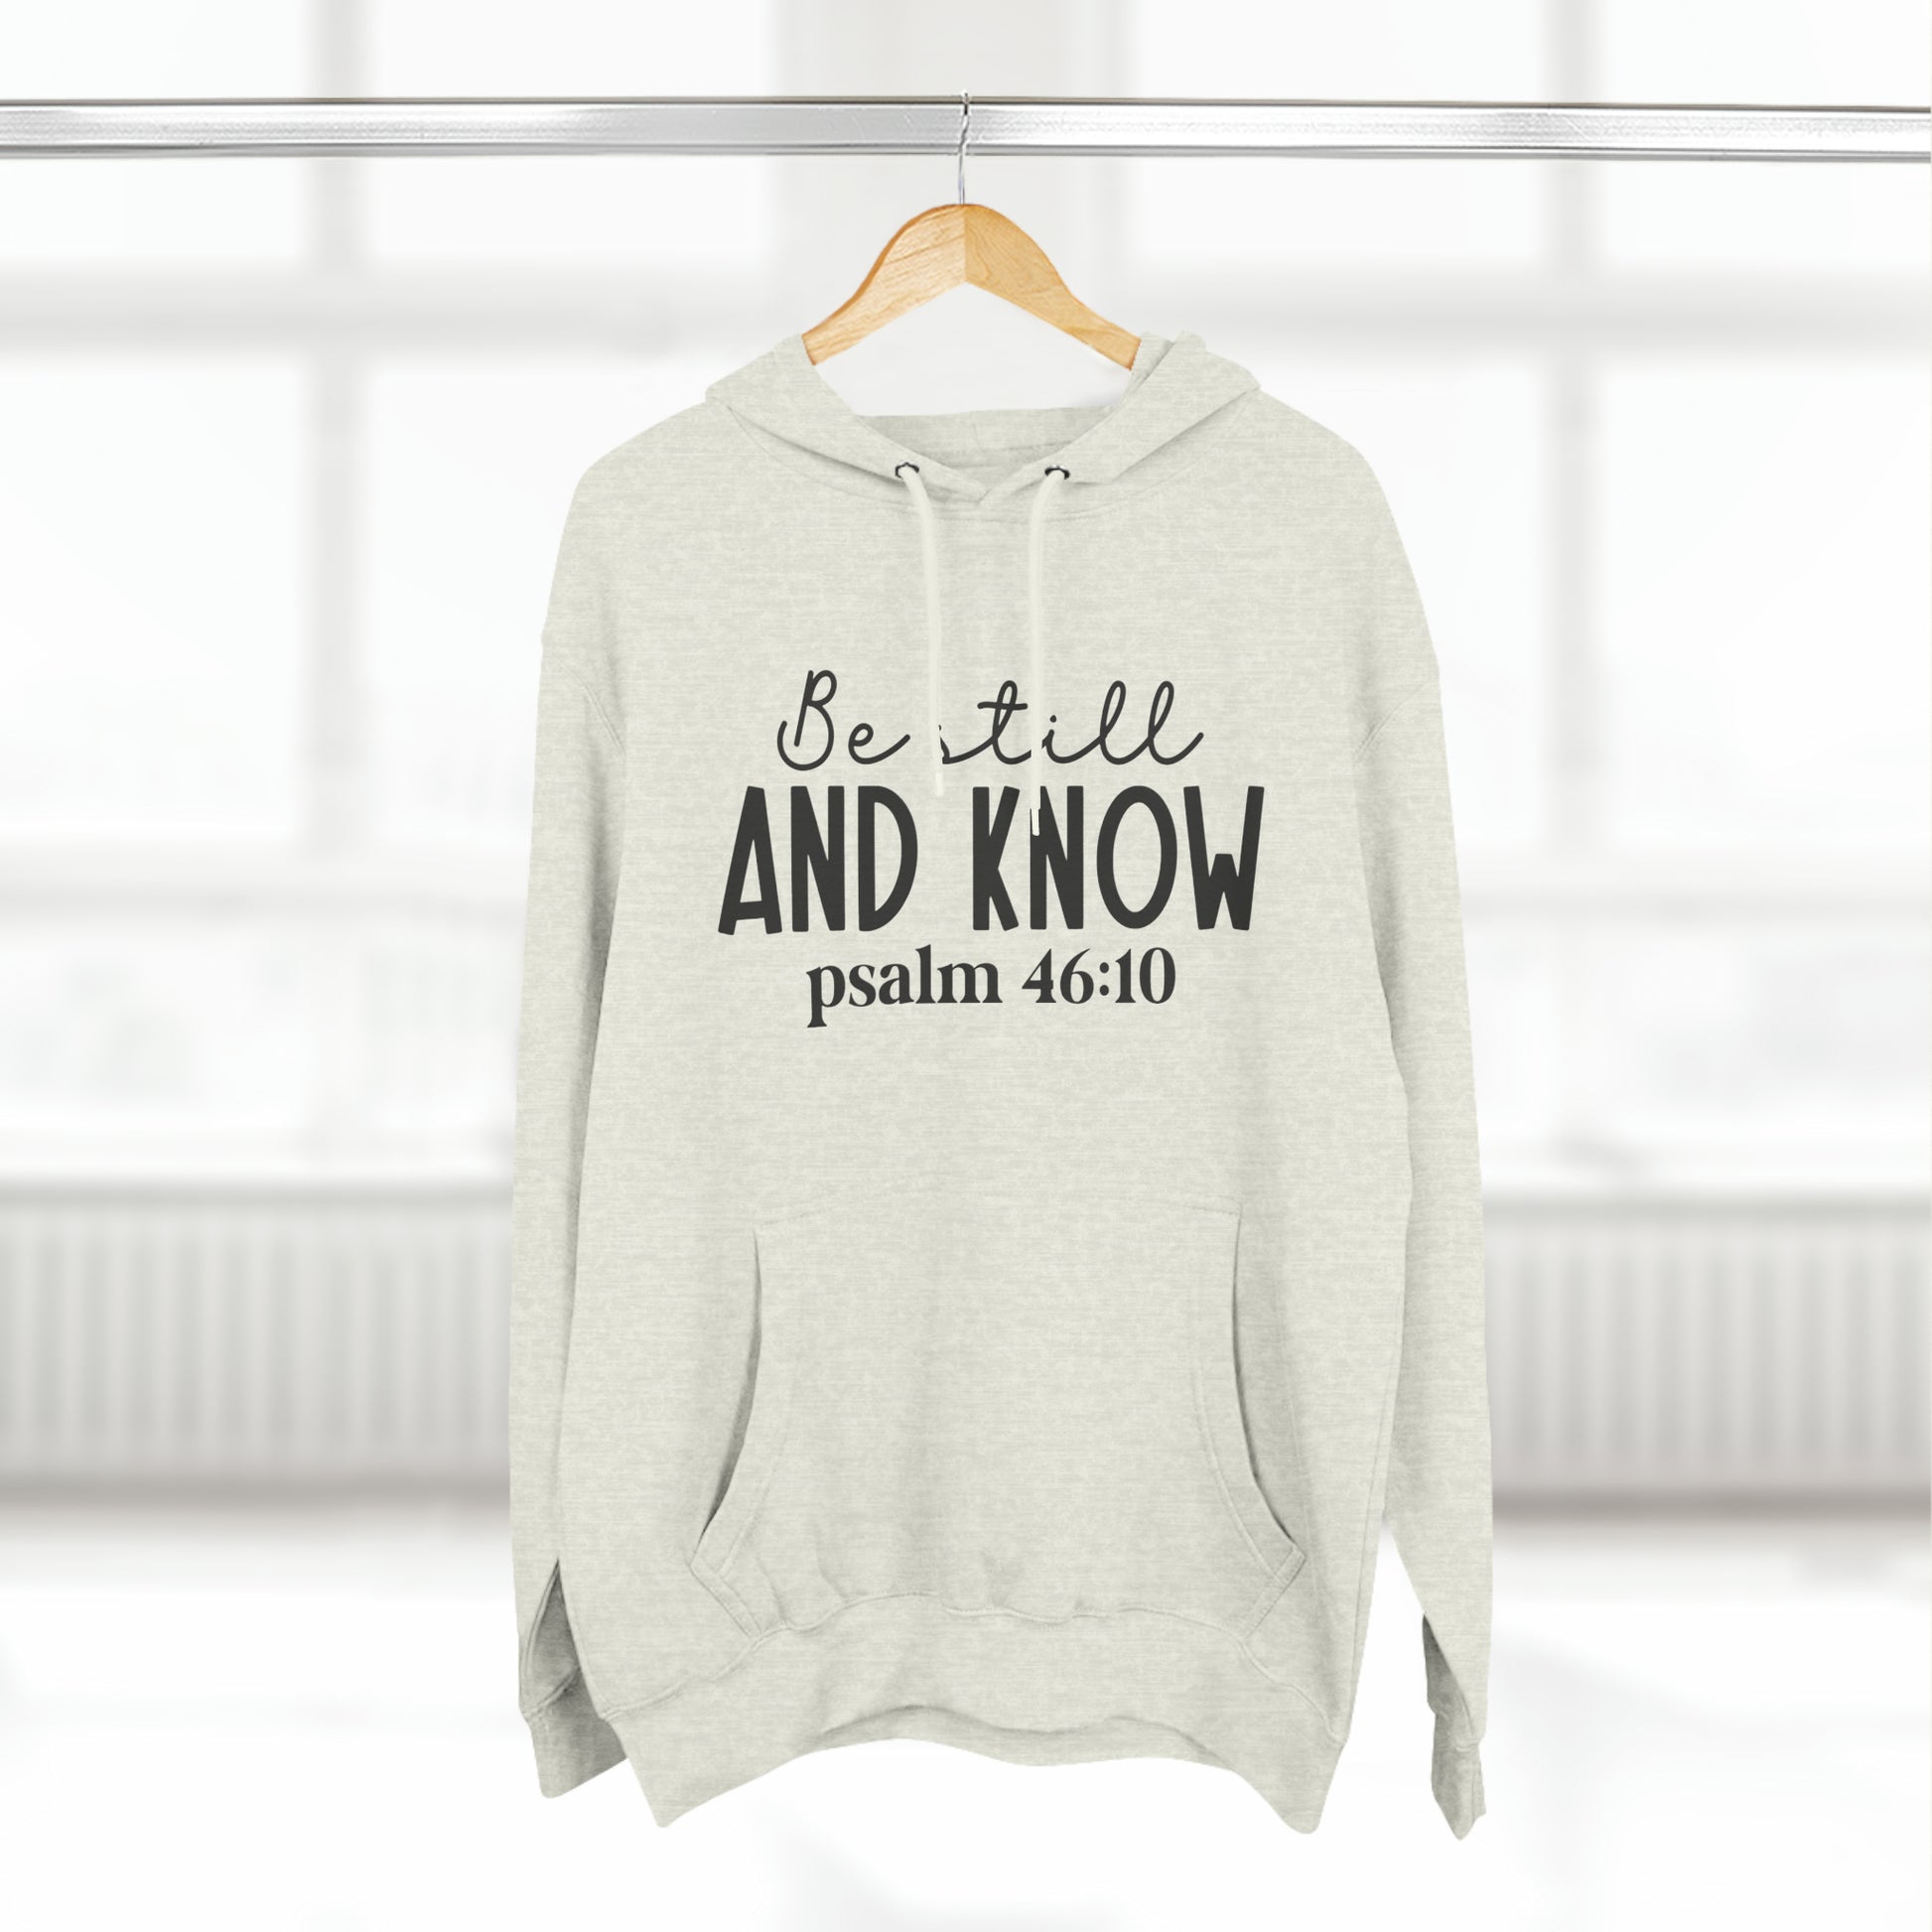 "Be Still And Know" Hoodie - Weave Got Gifts - Unique Gifts You Won’t Find Anywhere Else!